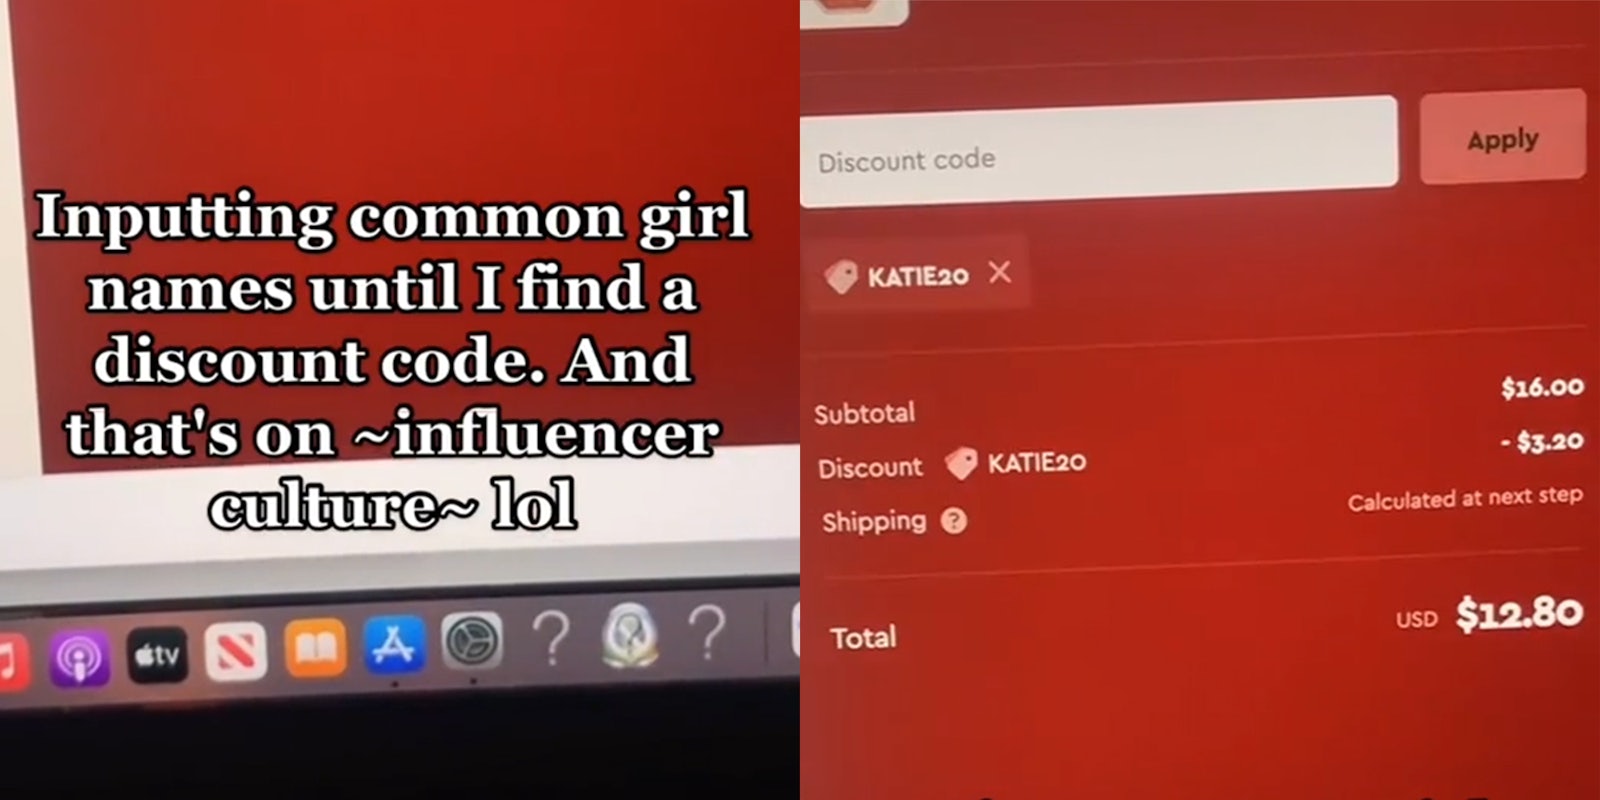 Browser screen with caption 'inputting common girl names until I find a discount code. And that's on influencer culture lol' (l) Discount code KATIE20 applied to order (r)